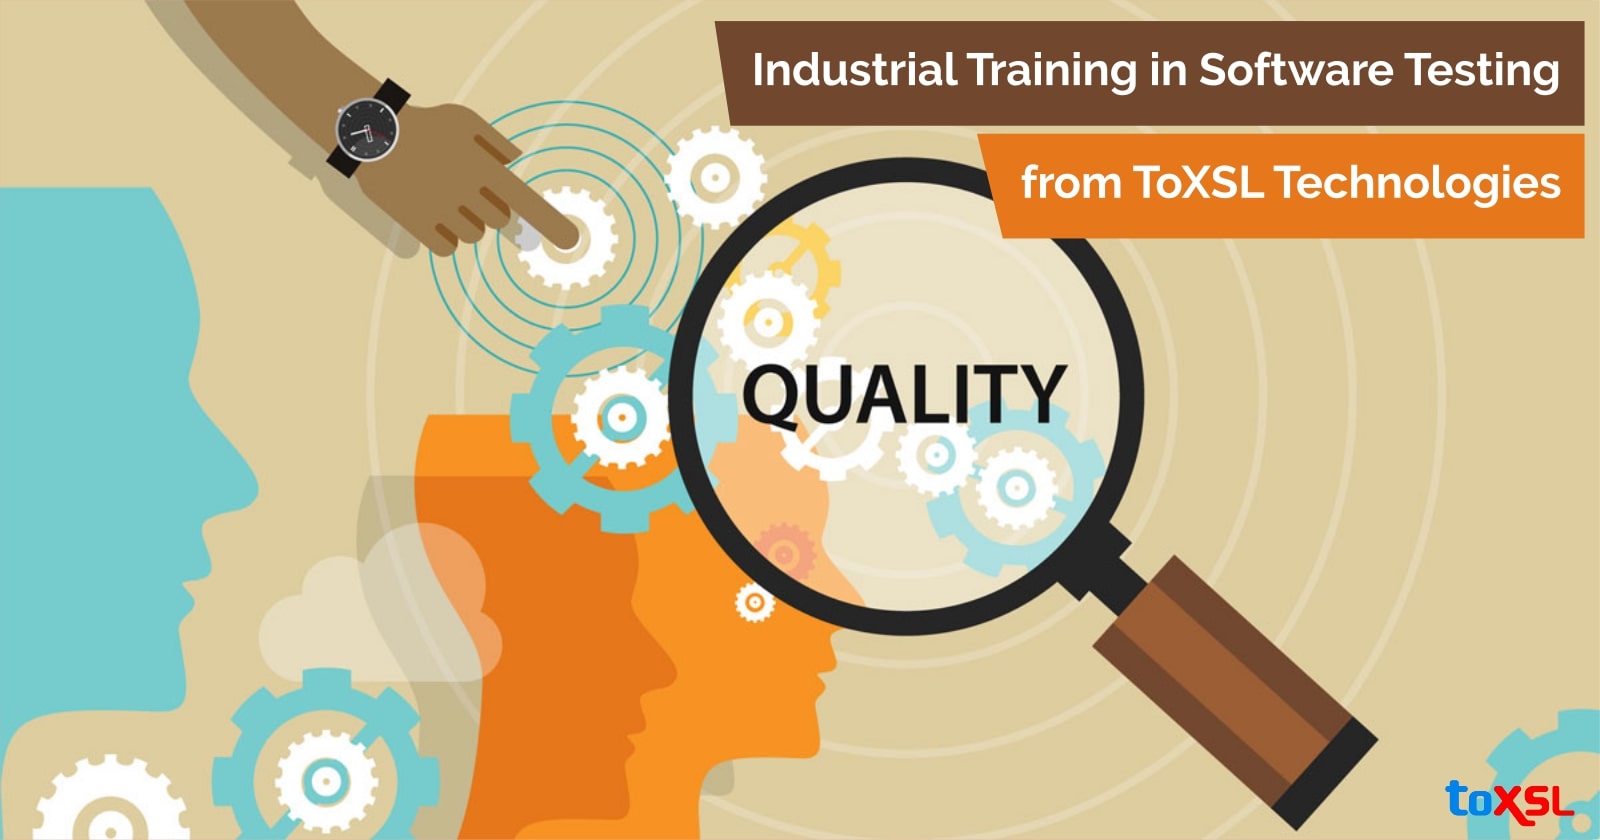 Industrial Training in Software Testing from ToXSL Technologies